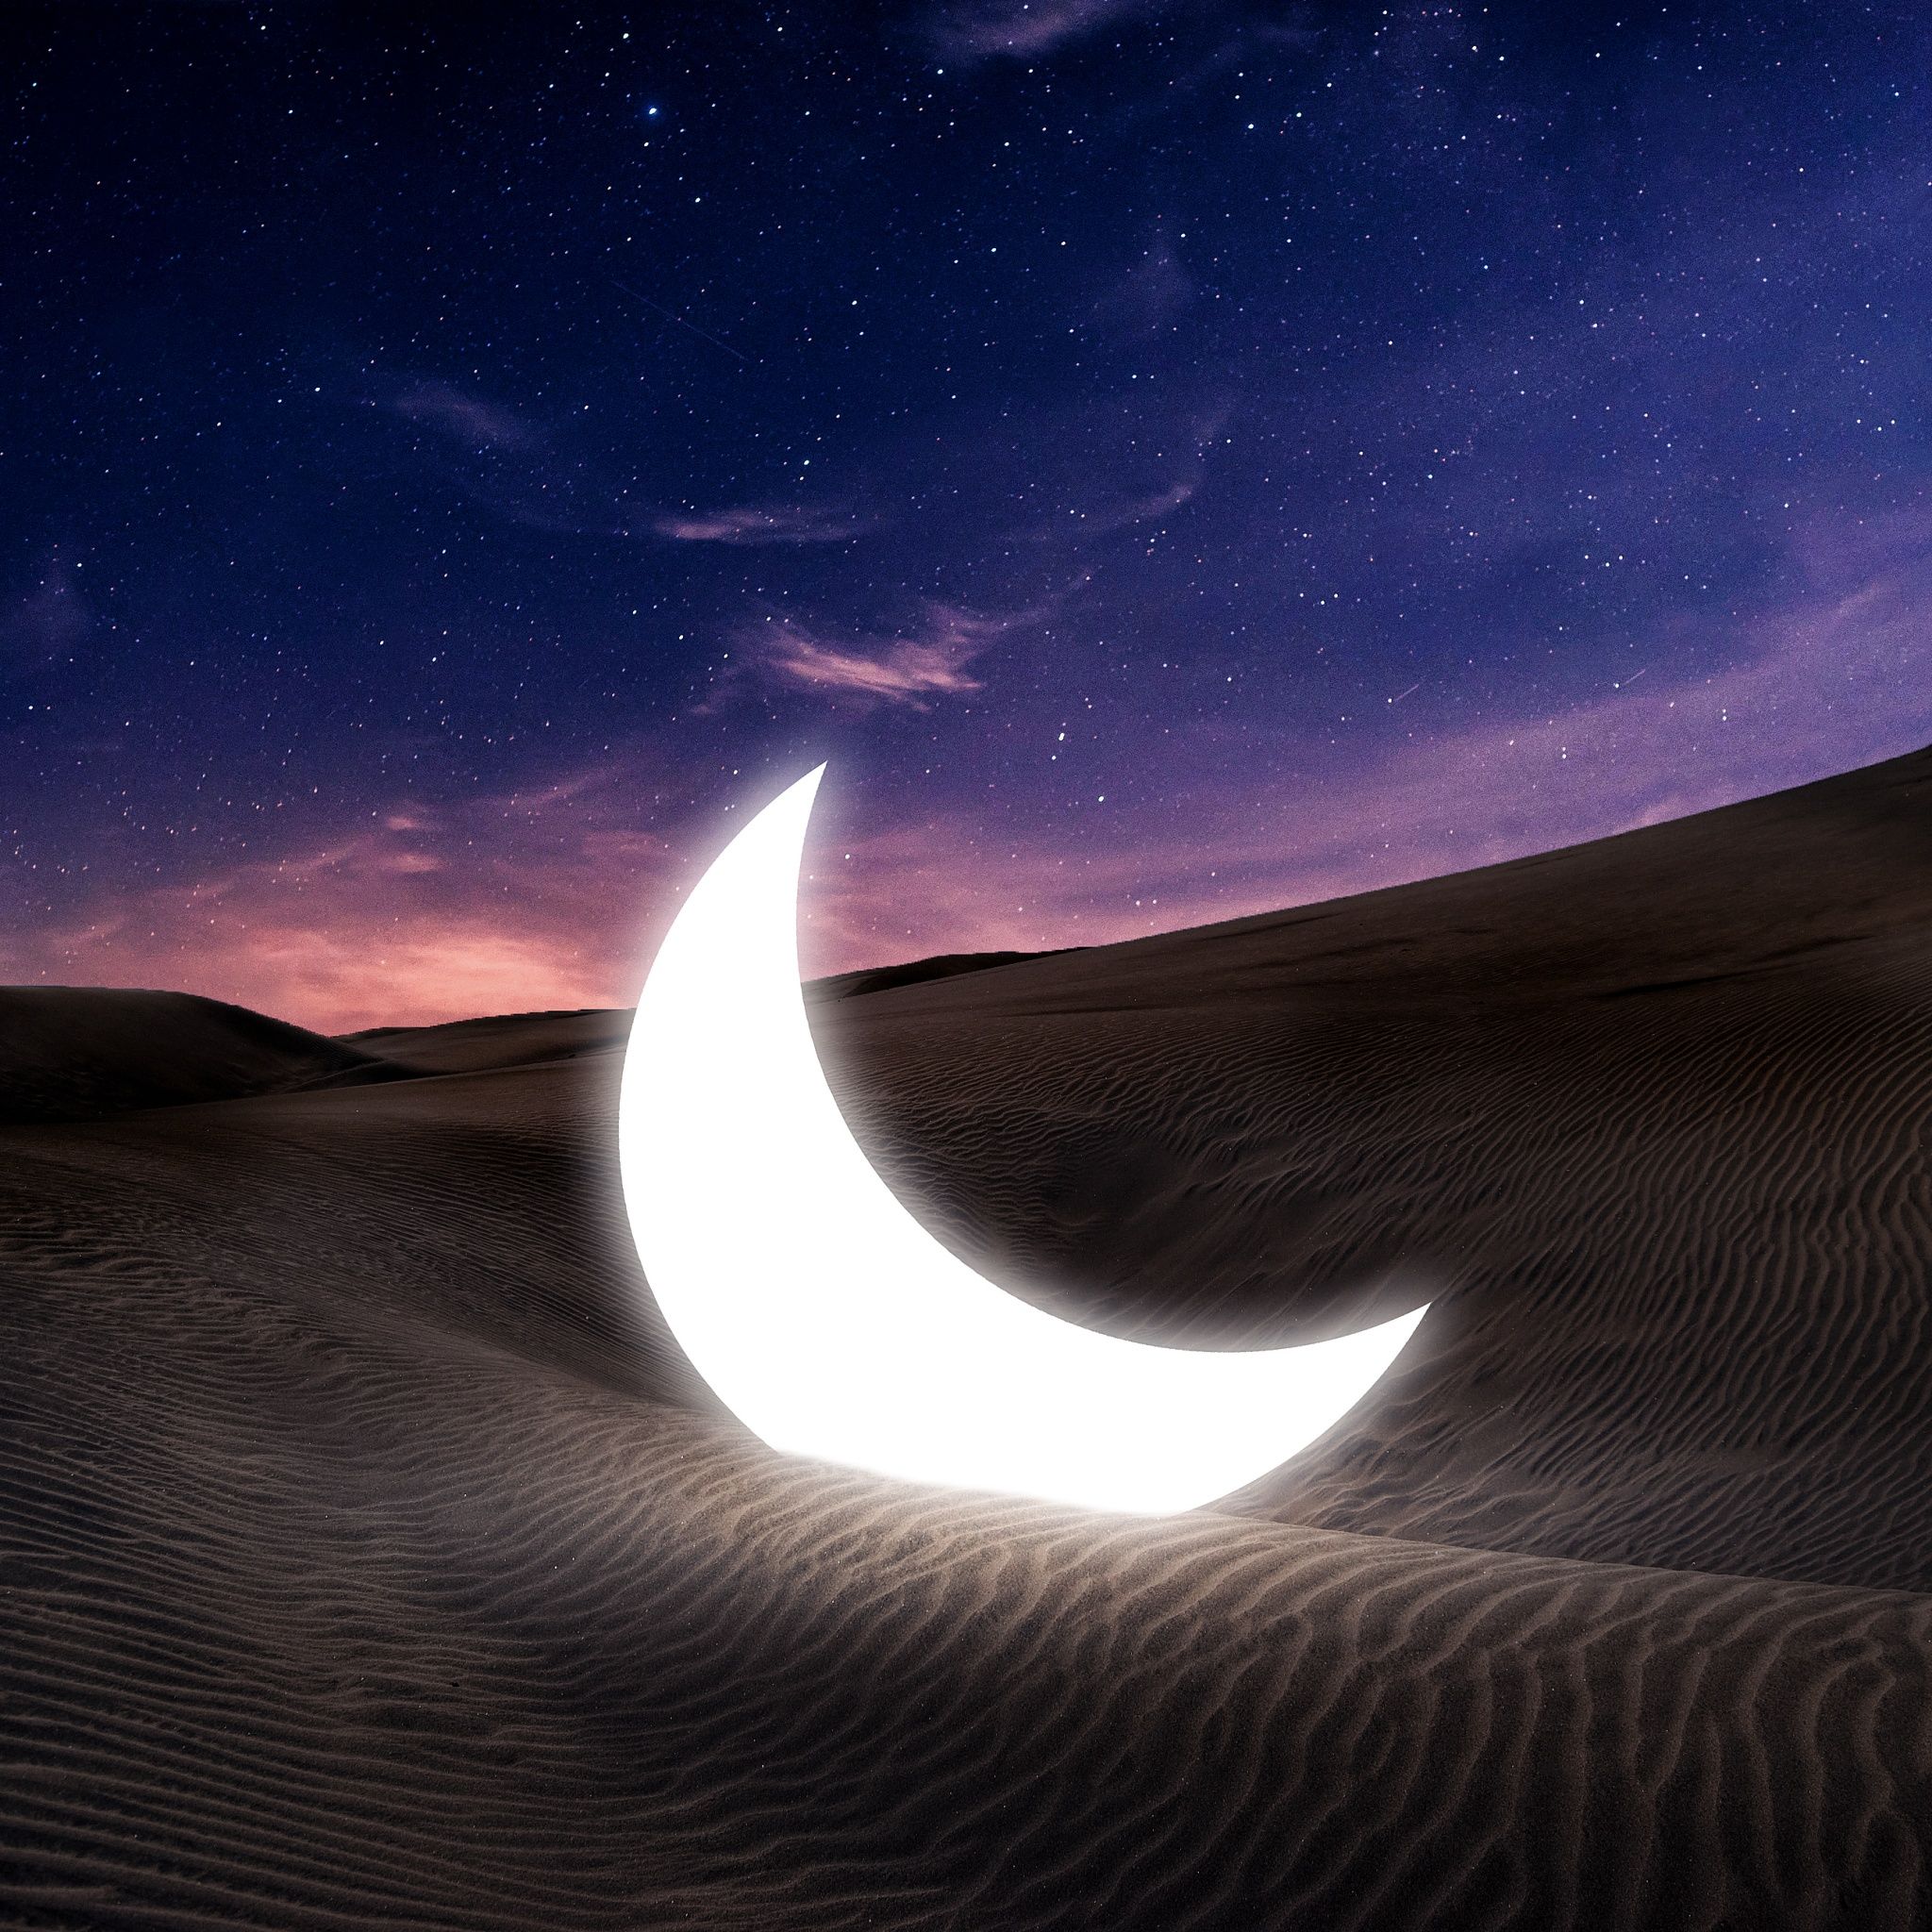 A crescent moon glows in the desert sky. - Moon